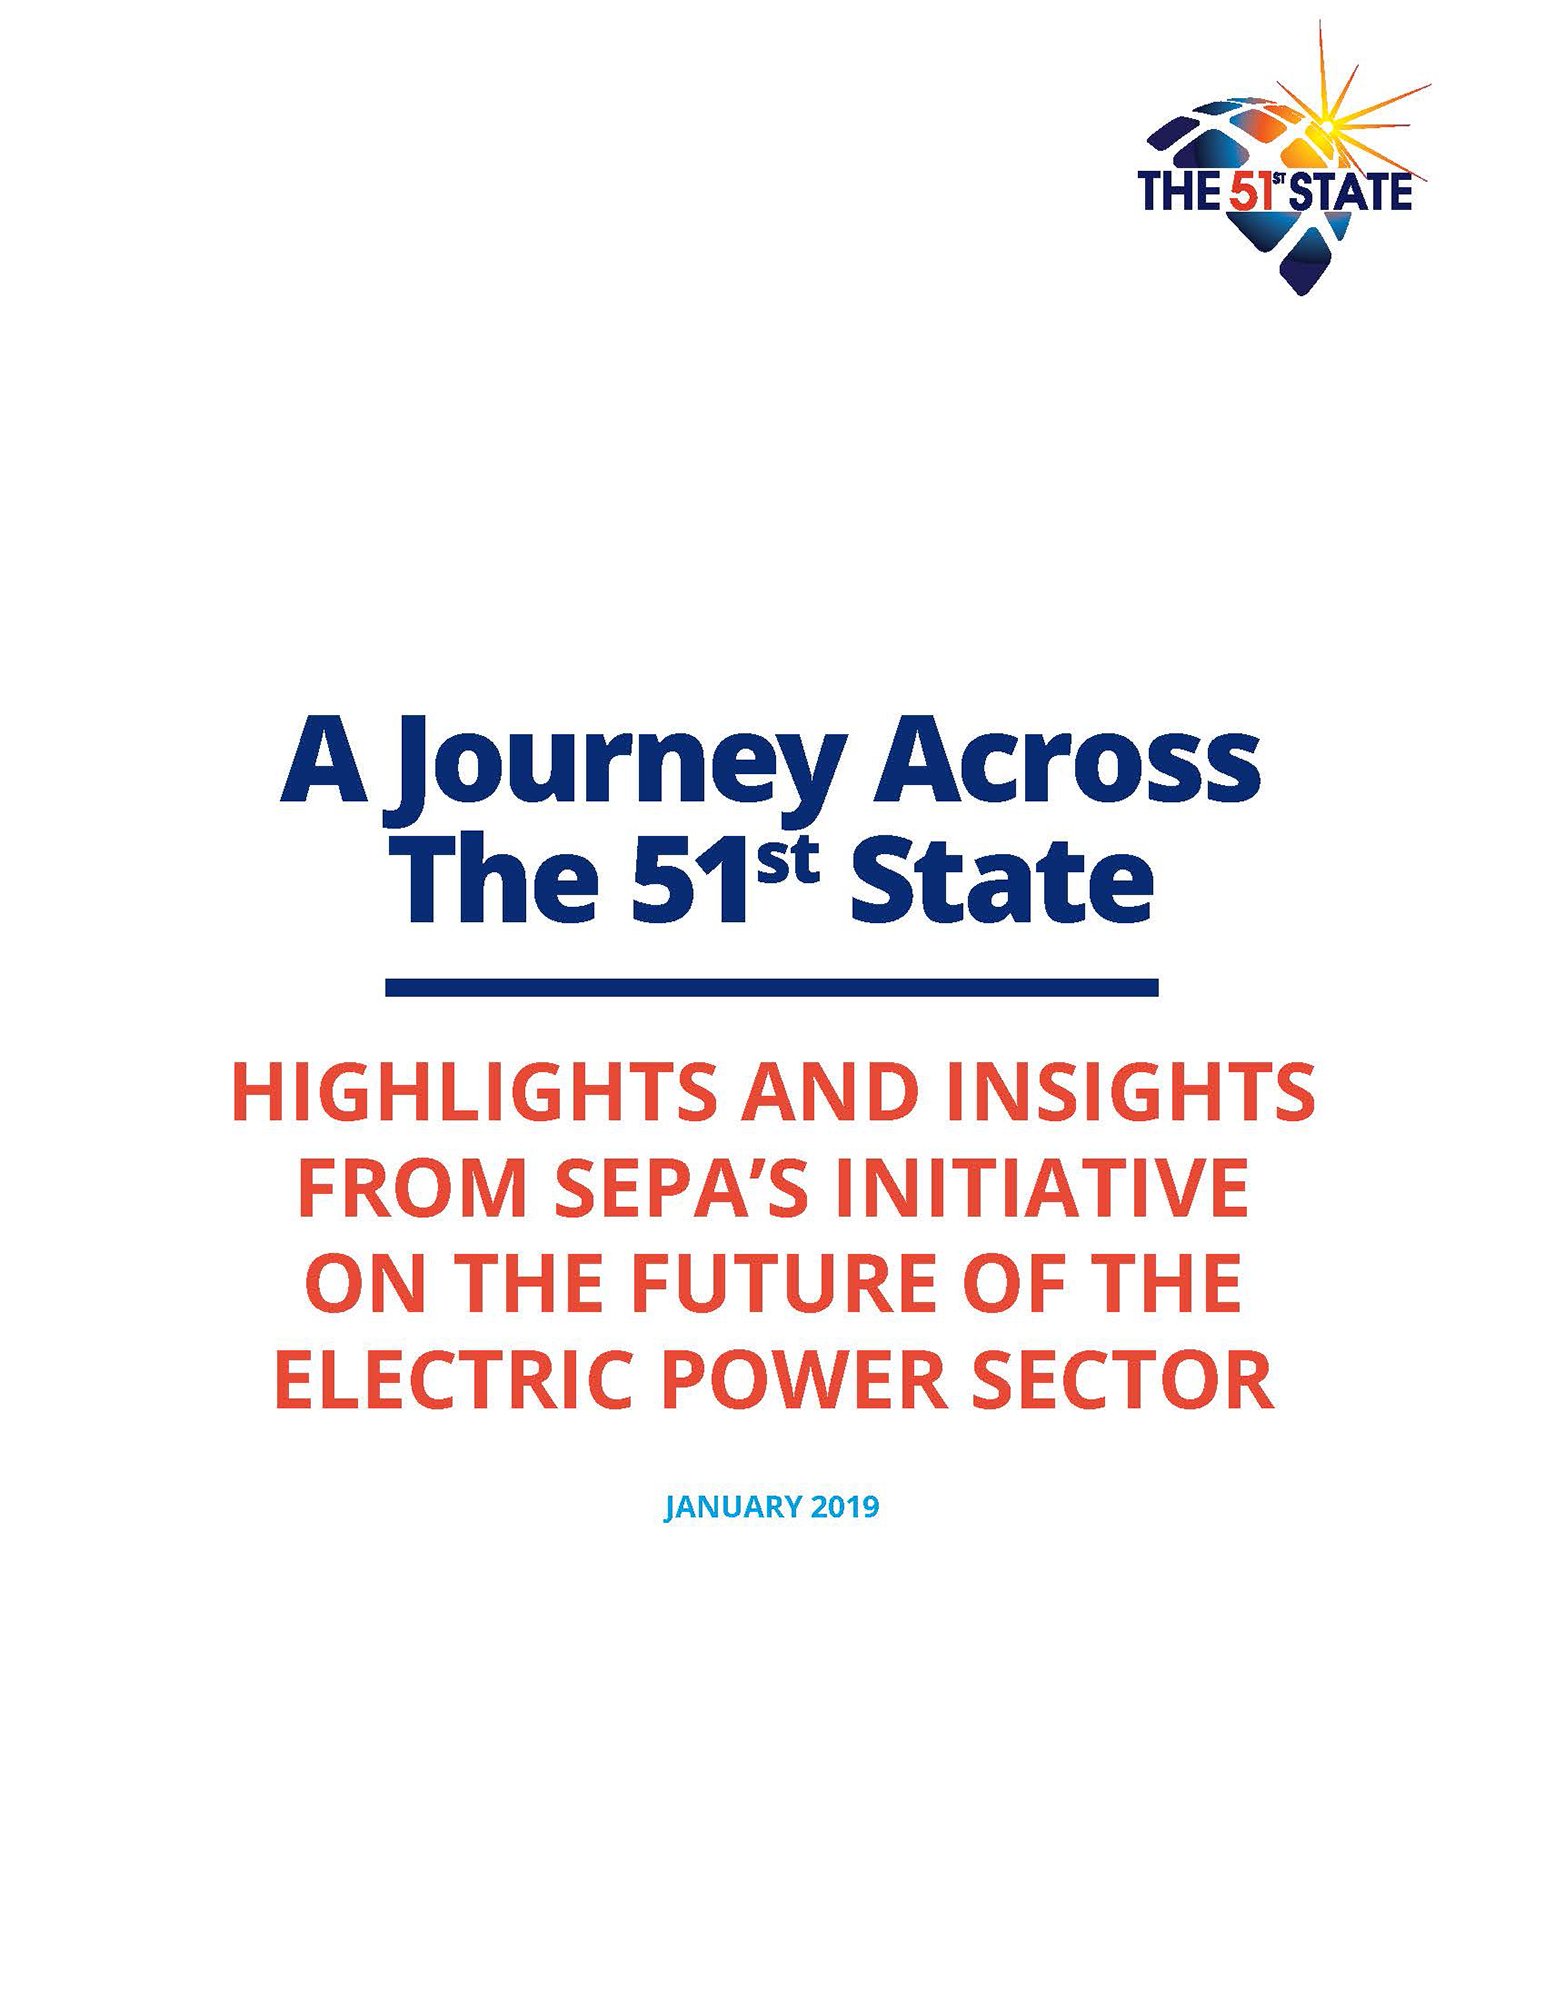 A Journey Across The 51st State: Highlights and Insights from SEPA’s Initiative on the Fut...